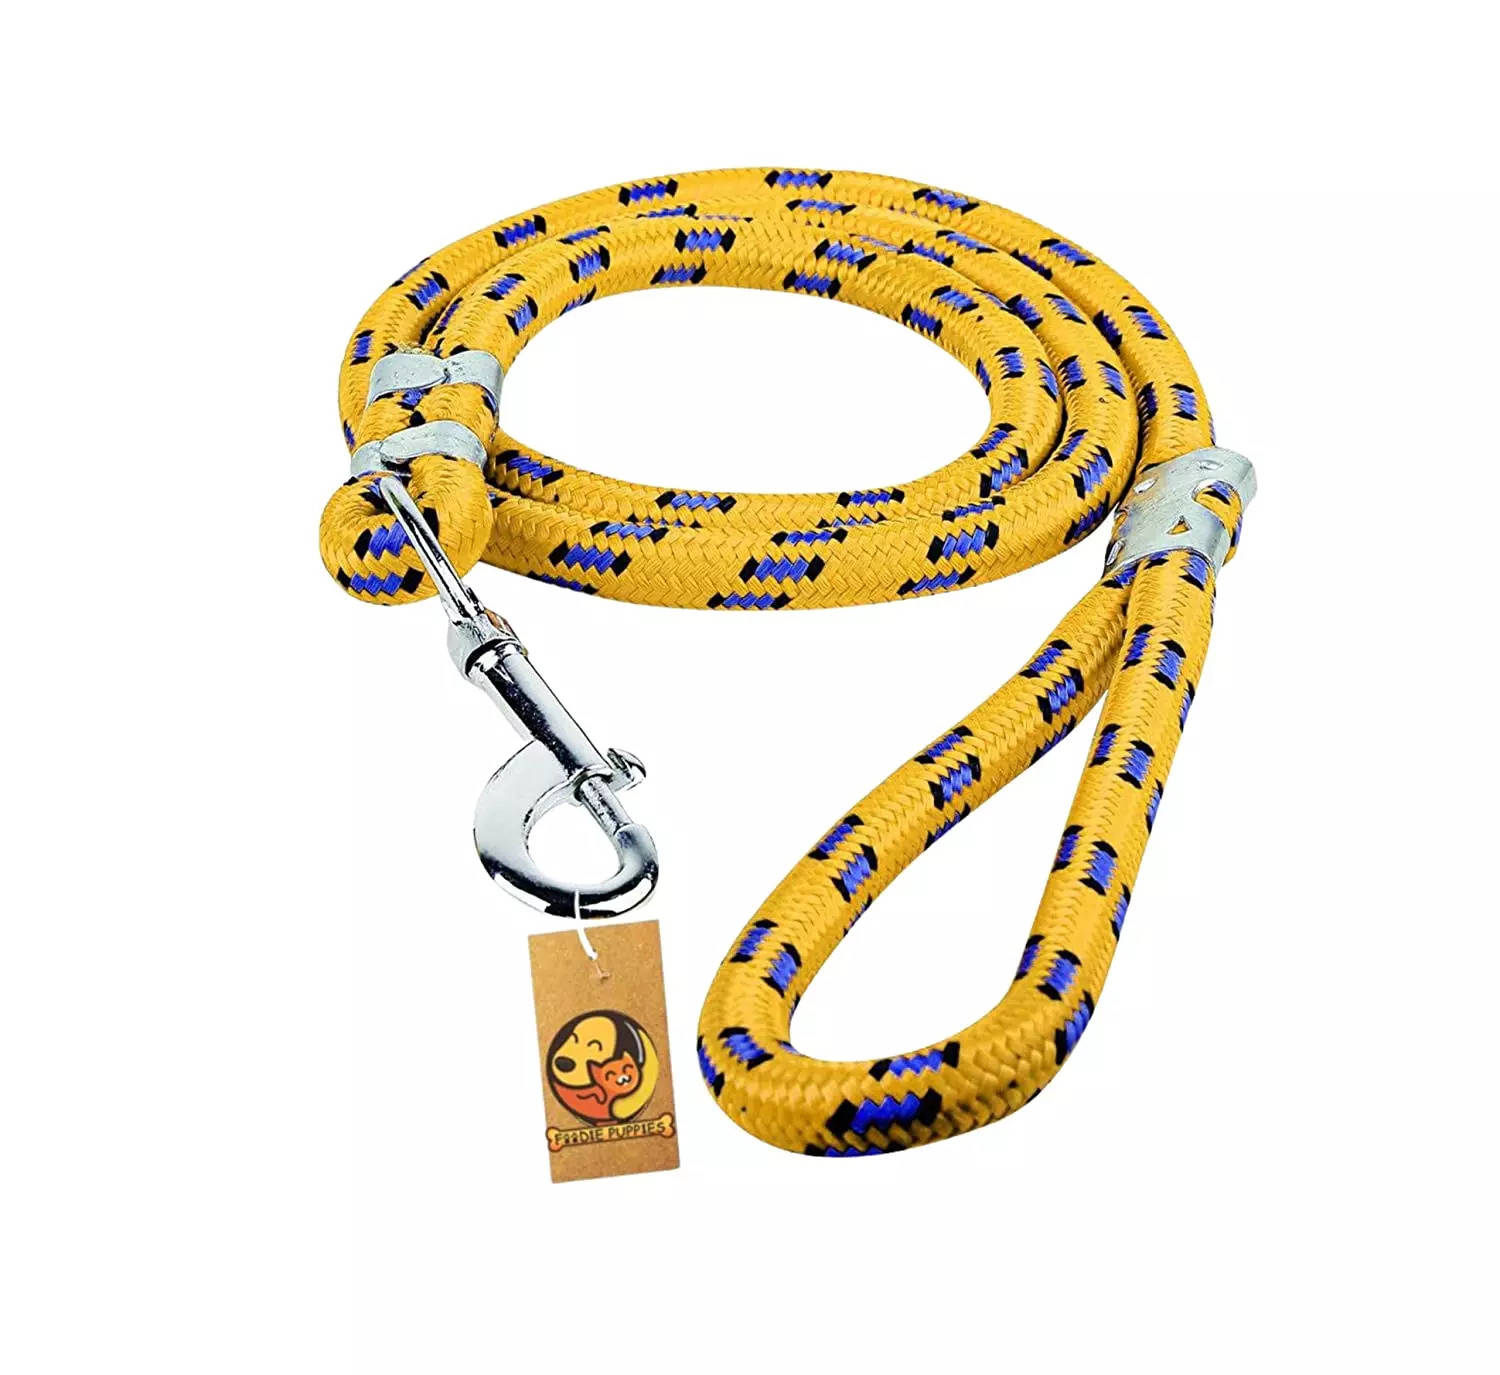 6 Best-selling Dog Leash Online - Treat your dog to a stylish